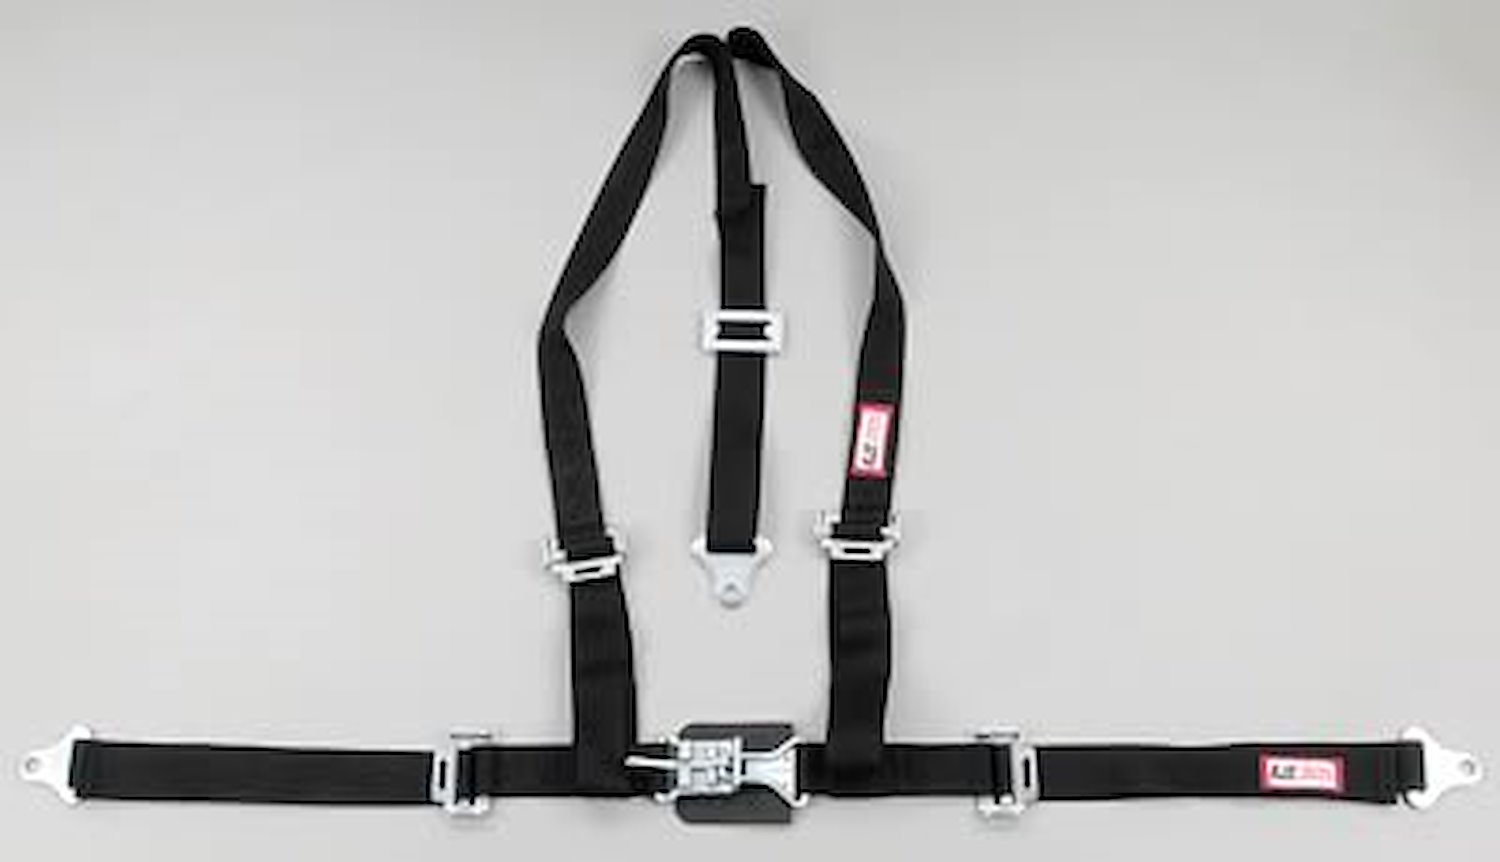 NON-SFI L&L HARNESS 2 PULL DOWN Lap Belt SEWN IN 2 S.H. Individual ROLL BAR Mount w/STERNUM STRAP ALL WRAP ENDS GRAY